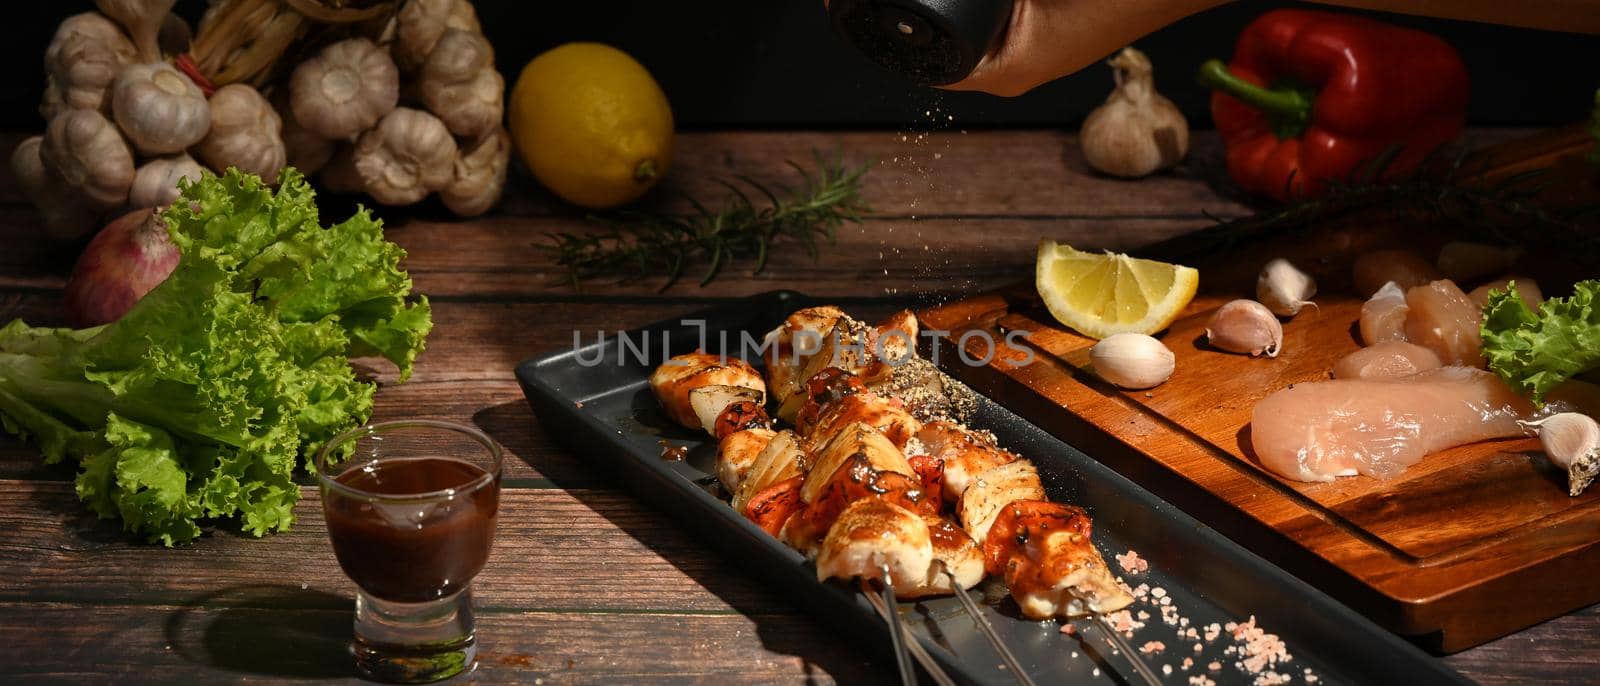 Grilled skewers of chicken, bell peppers, tomatoes, onion and barbecue sauce on wooden background.